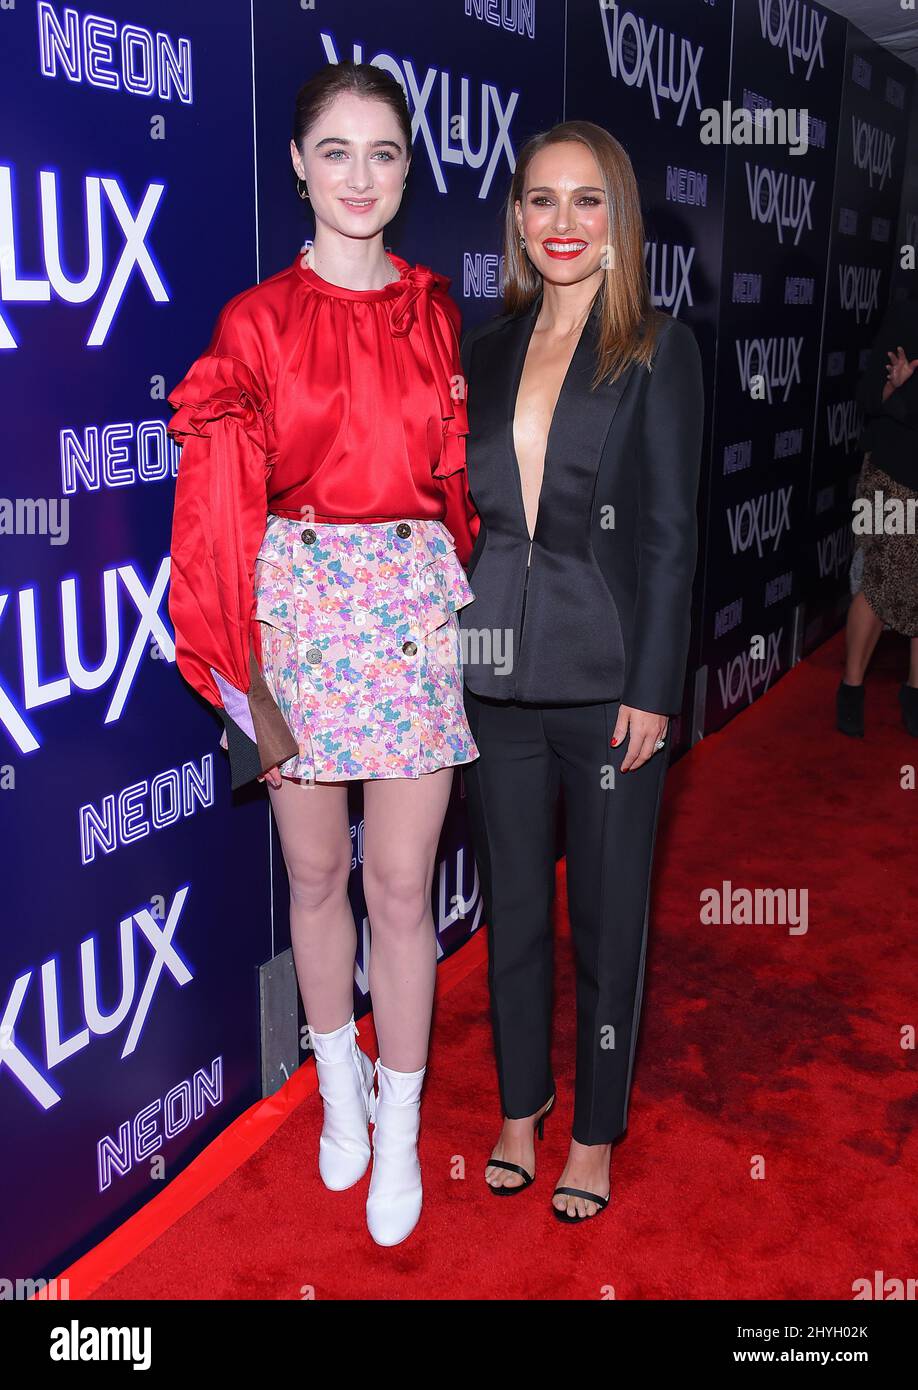 Raffey Cassidy and Natalie Portman at the premiere of "Vox Lux'" held at the ArcLight Cinemas Hollywood Stock Photo